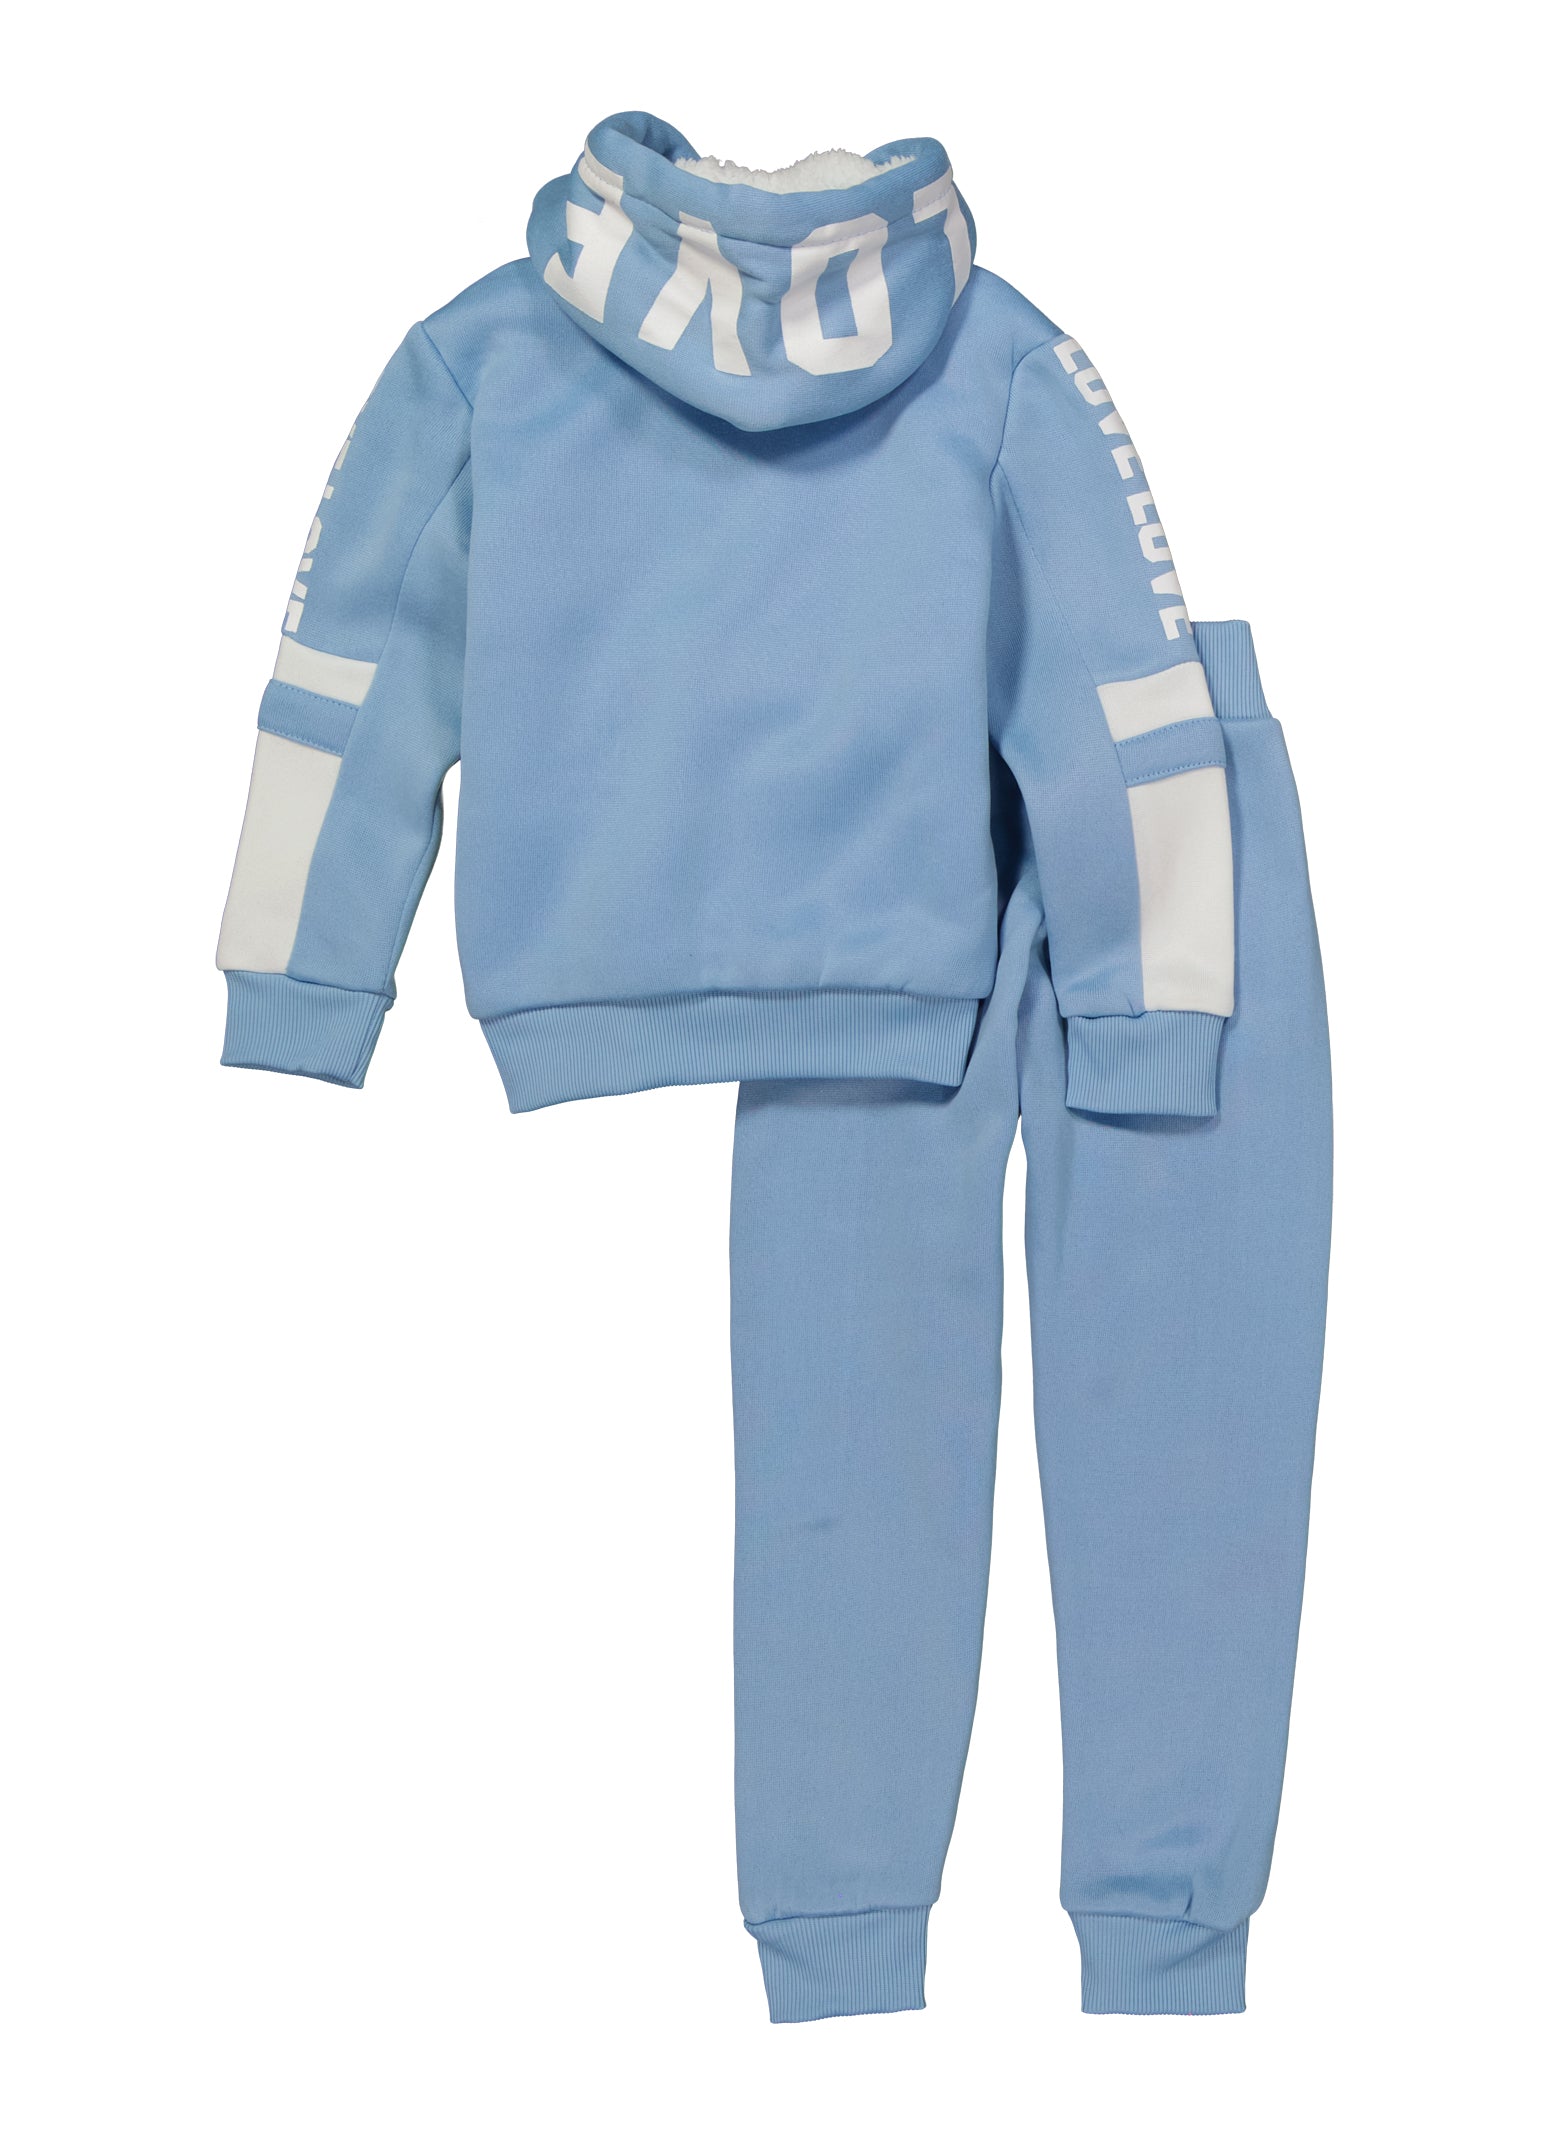 Little Girls Love Sherpa Lined Zip Front Hoodie and Joggers, Blue, Size 6